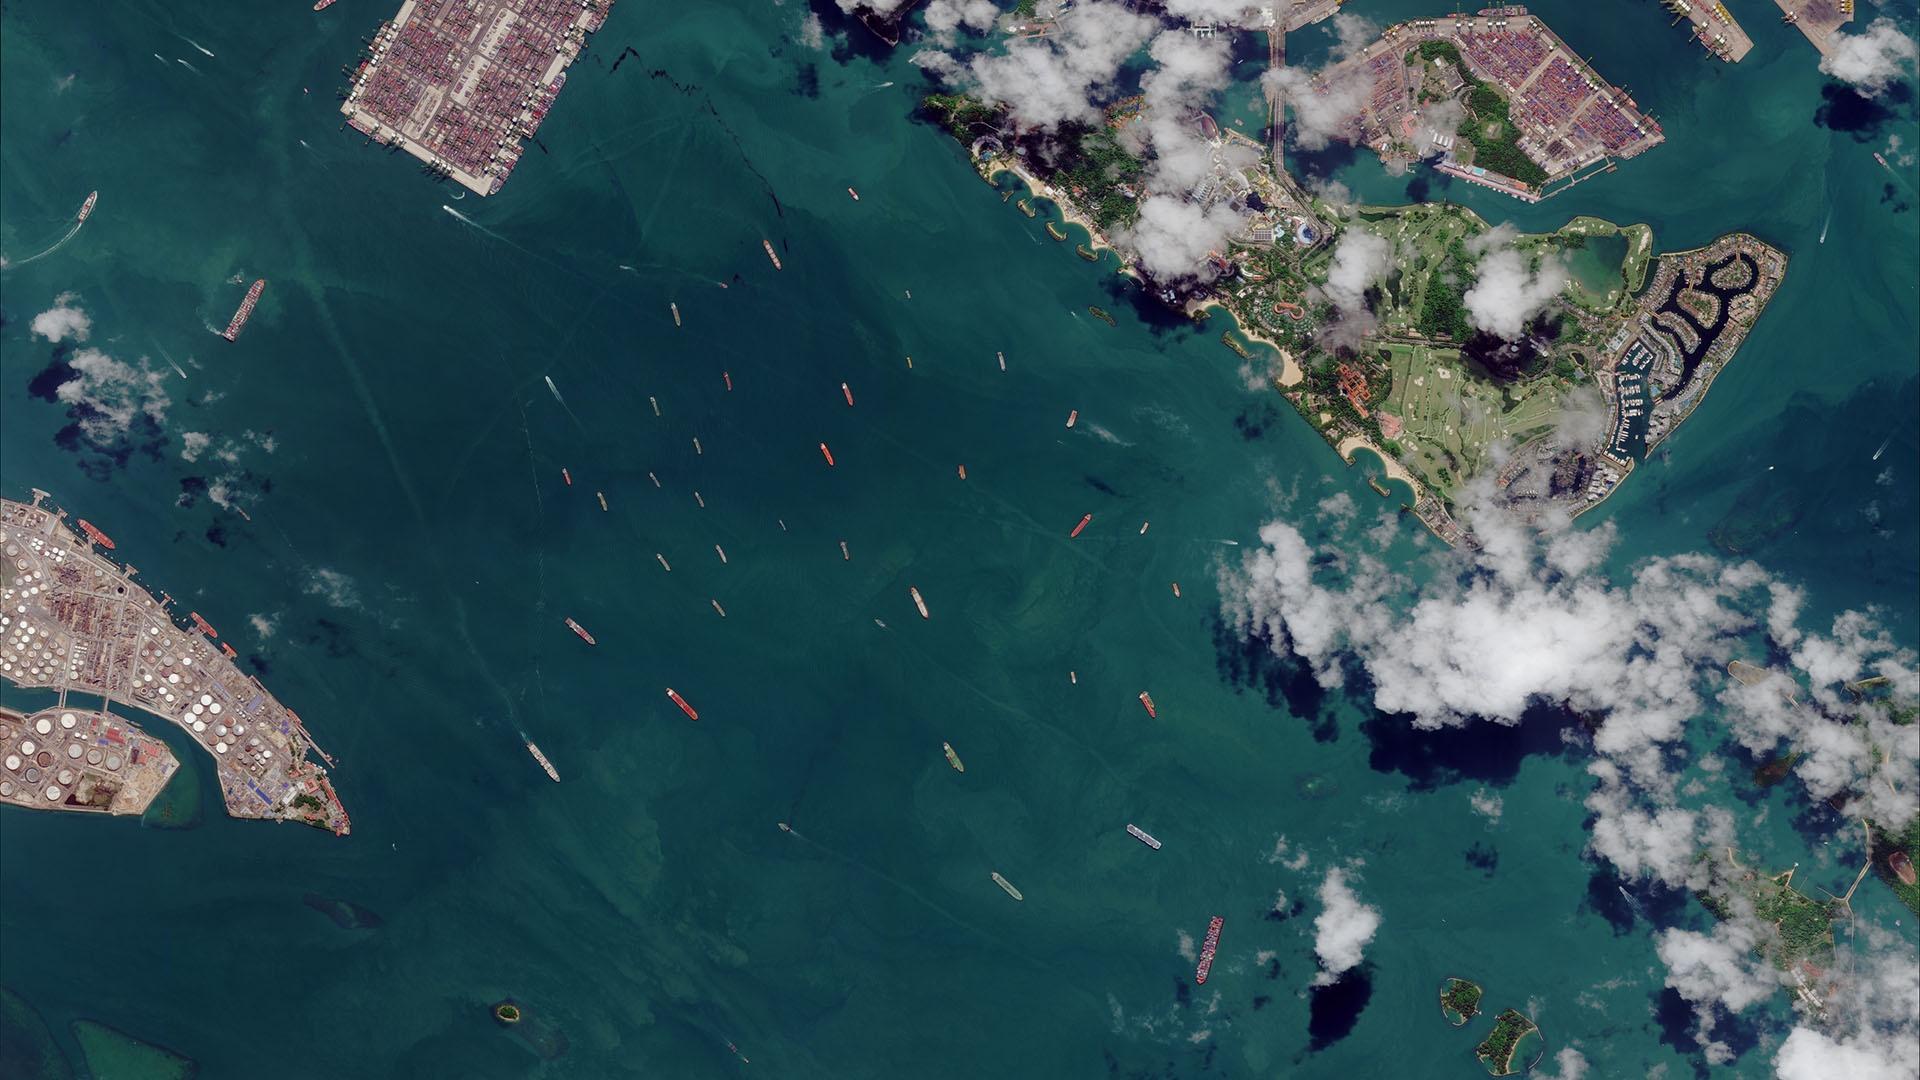 Aerial image of Singapore Harbor from space.